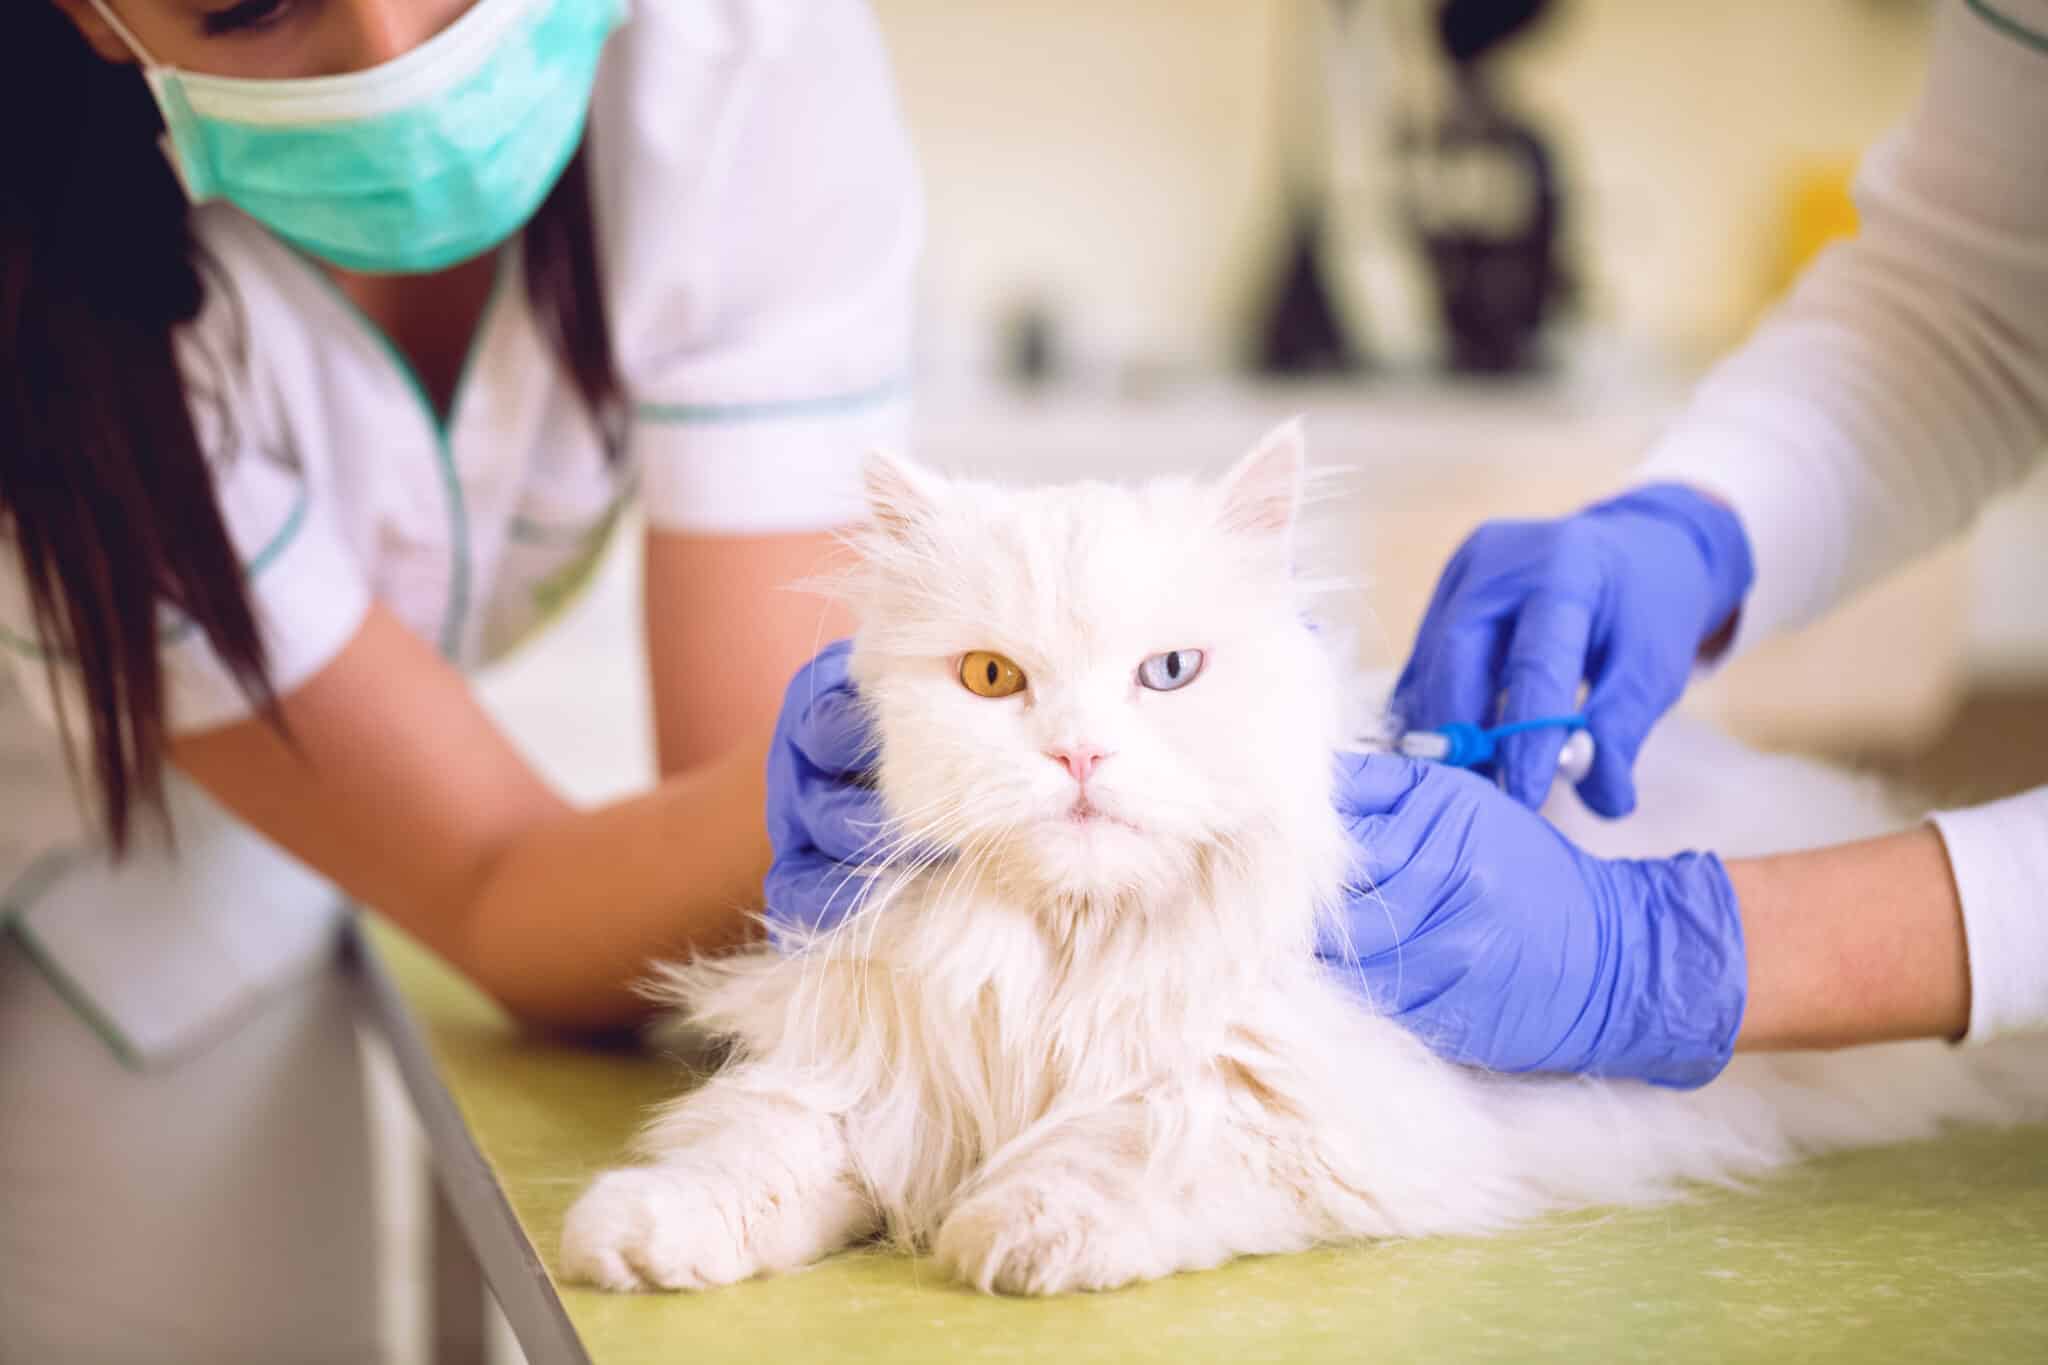 Vet gives injection to Persian cat, showcasing efficient care supported by transcription services.